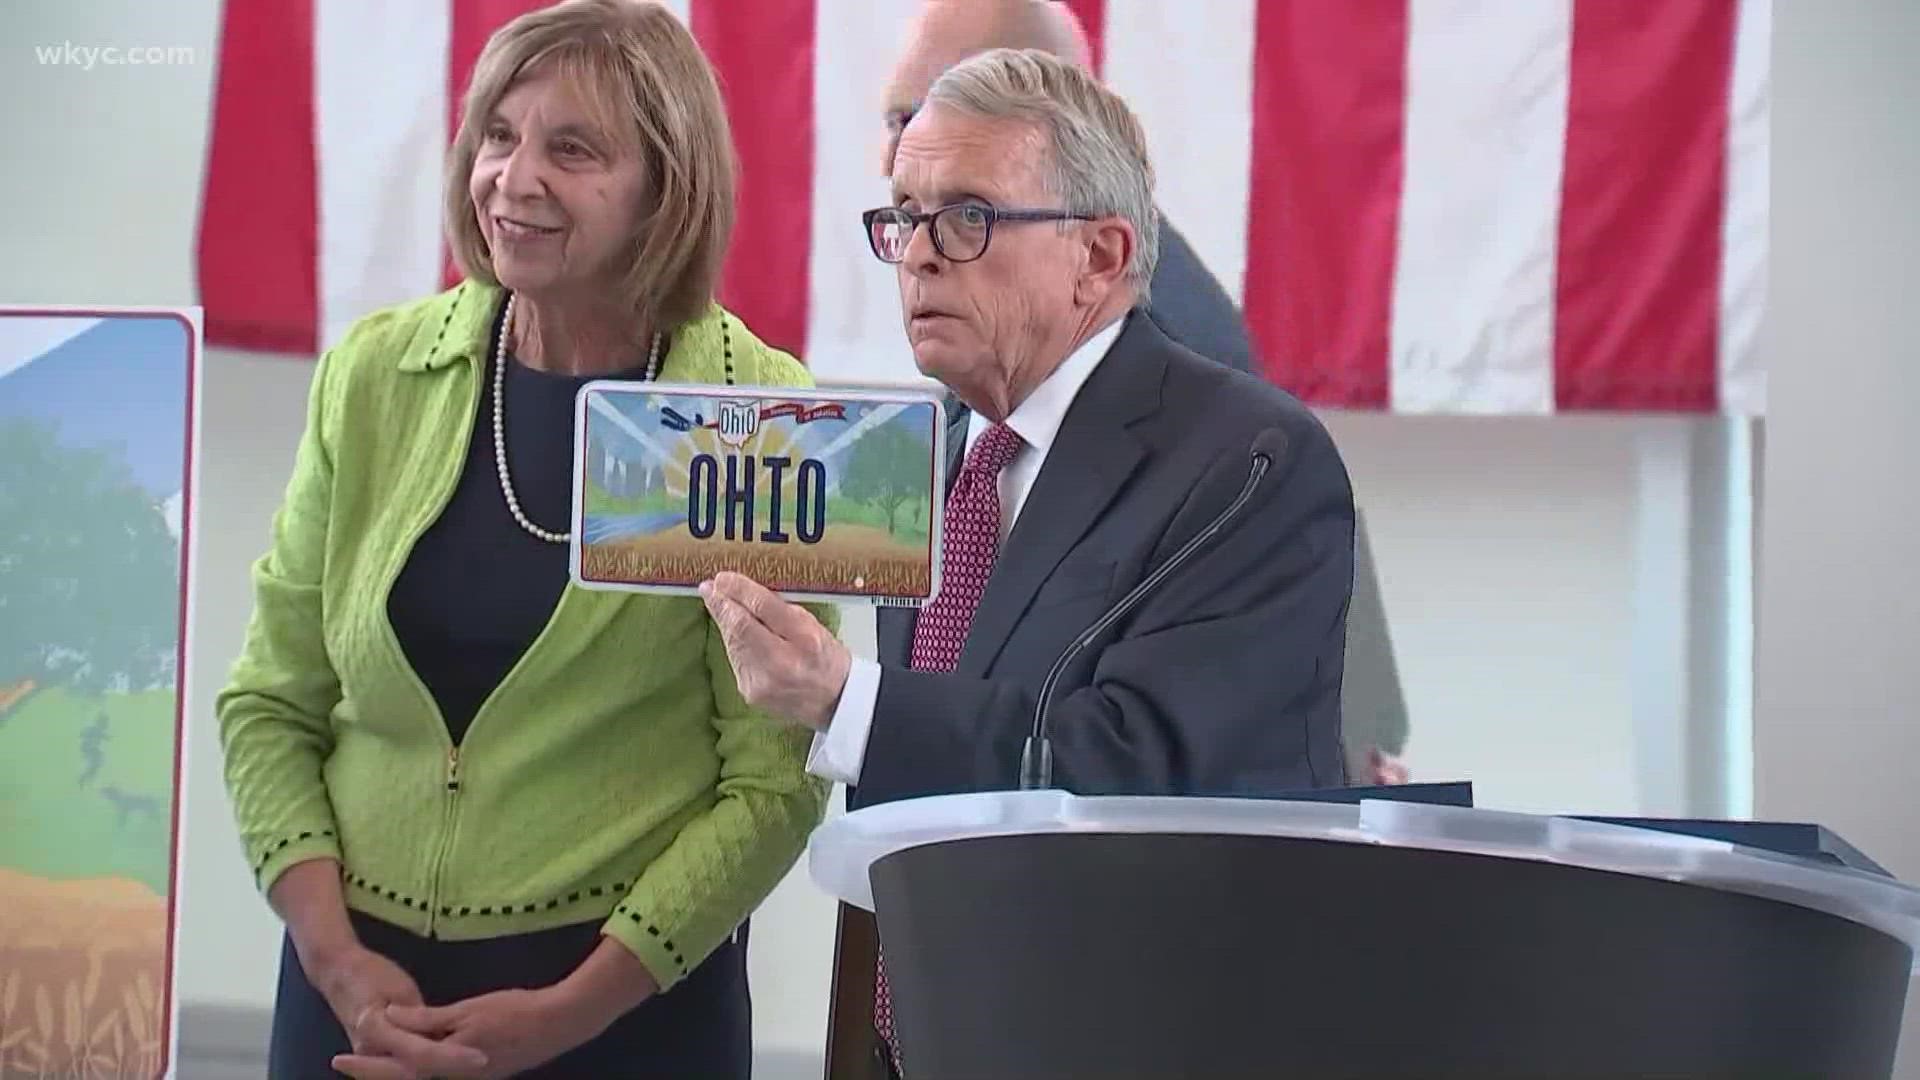 For the first time since 2013, the state of Ohio has a new license plate design.